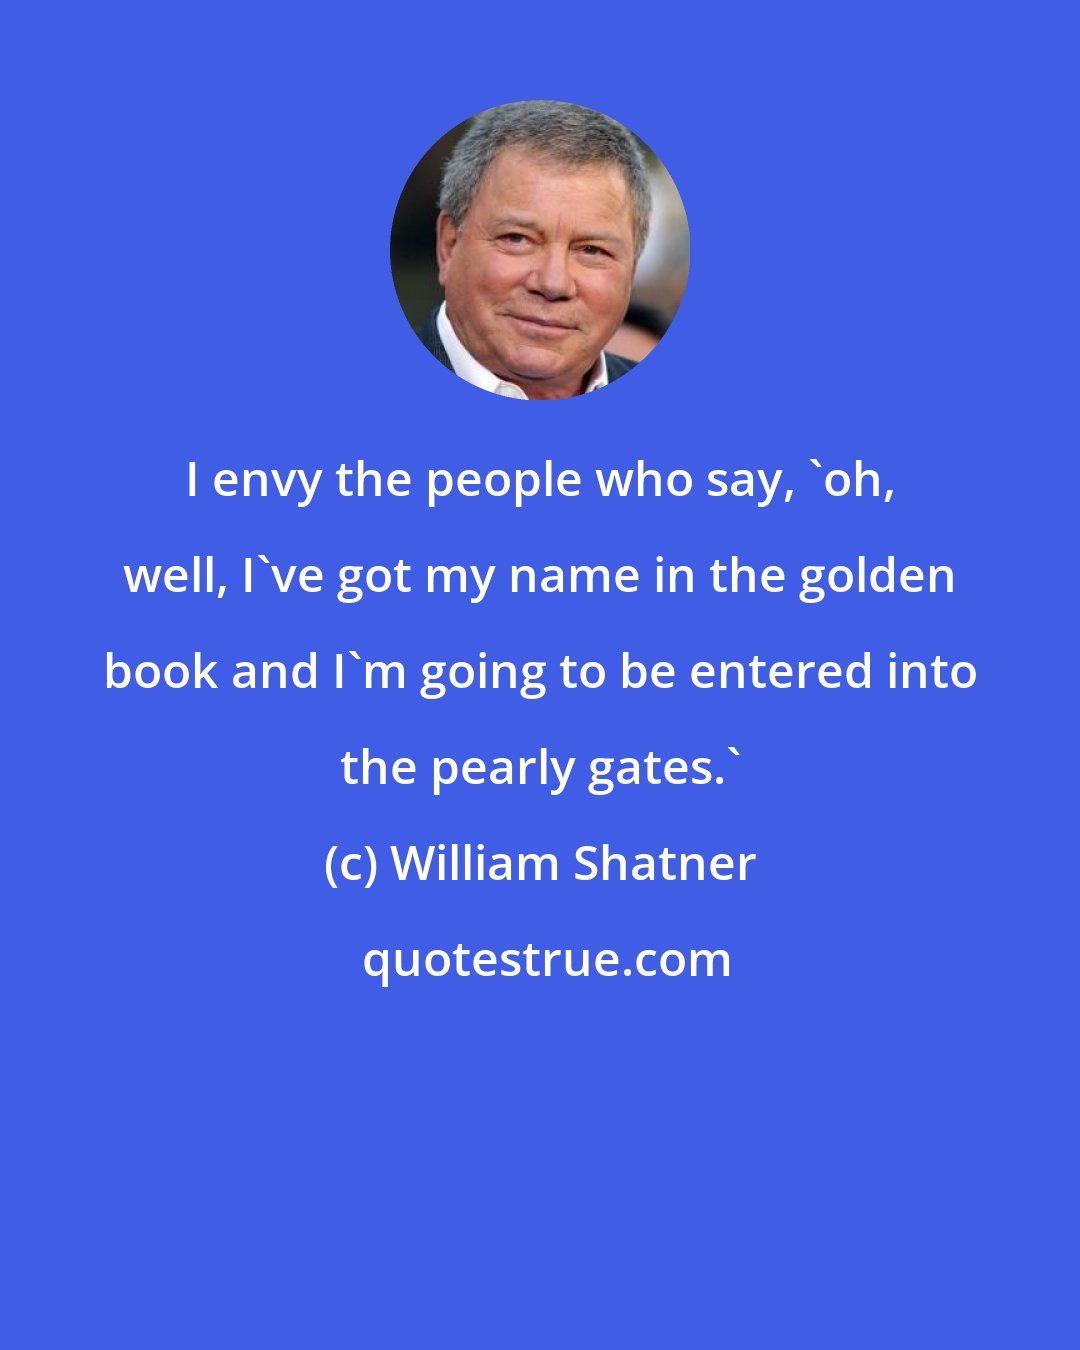 William Shatner: I envy the people who say, 'oh, well, I've got my name in the golden book and I'm going to be entered into the pearly gates.'